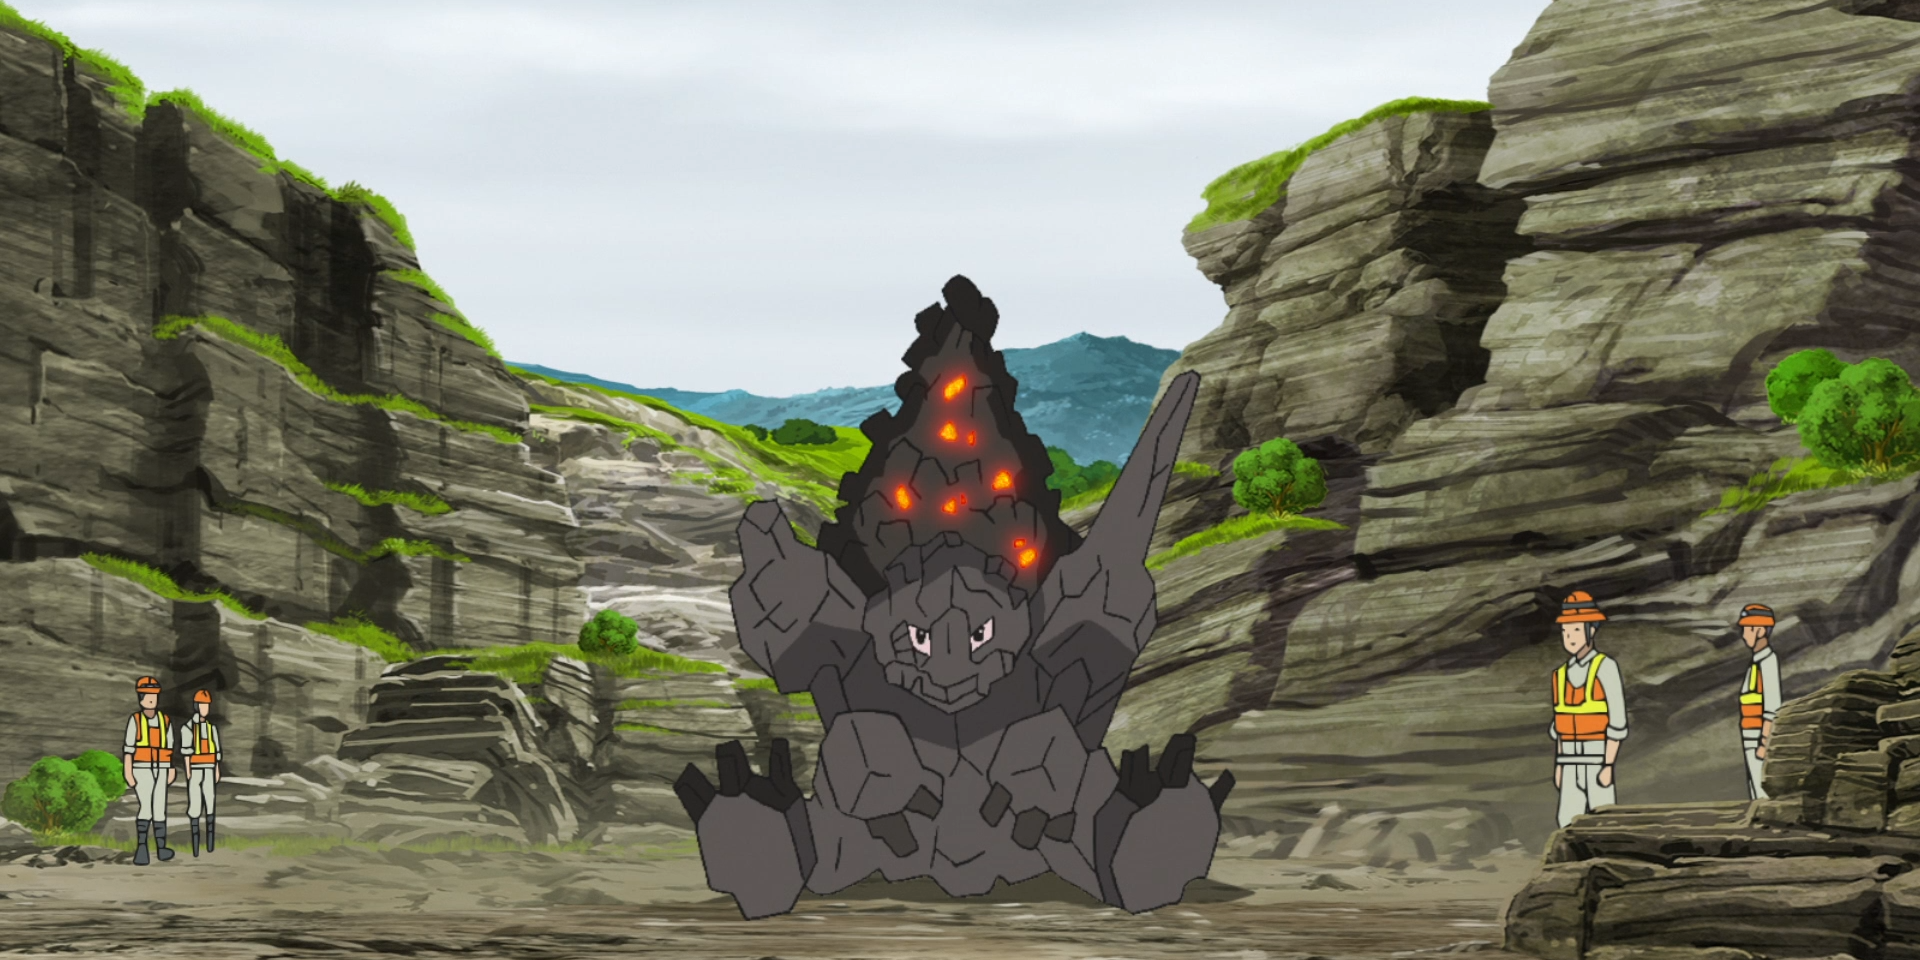 Coalossal from from the Pokémon series